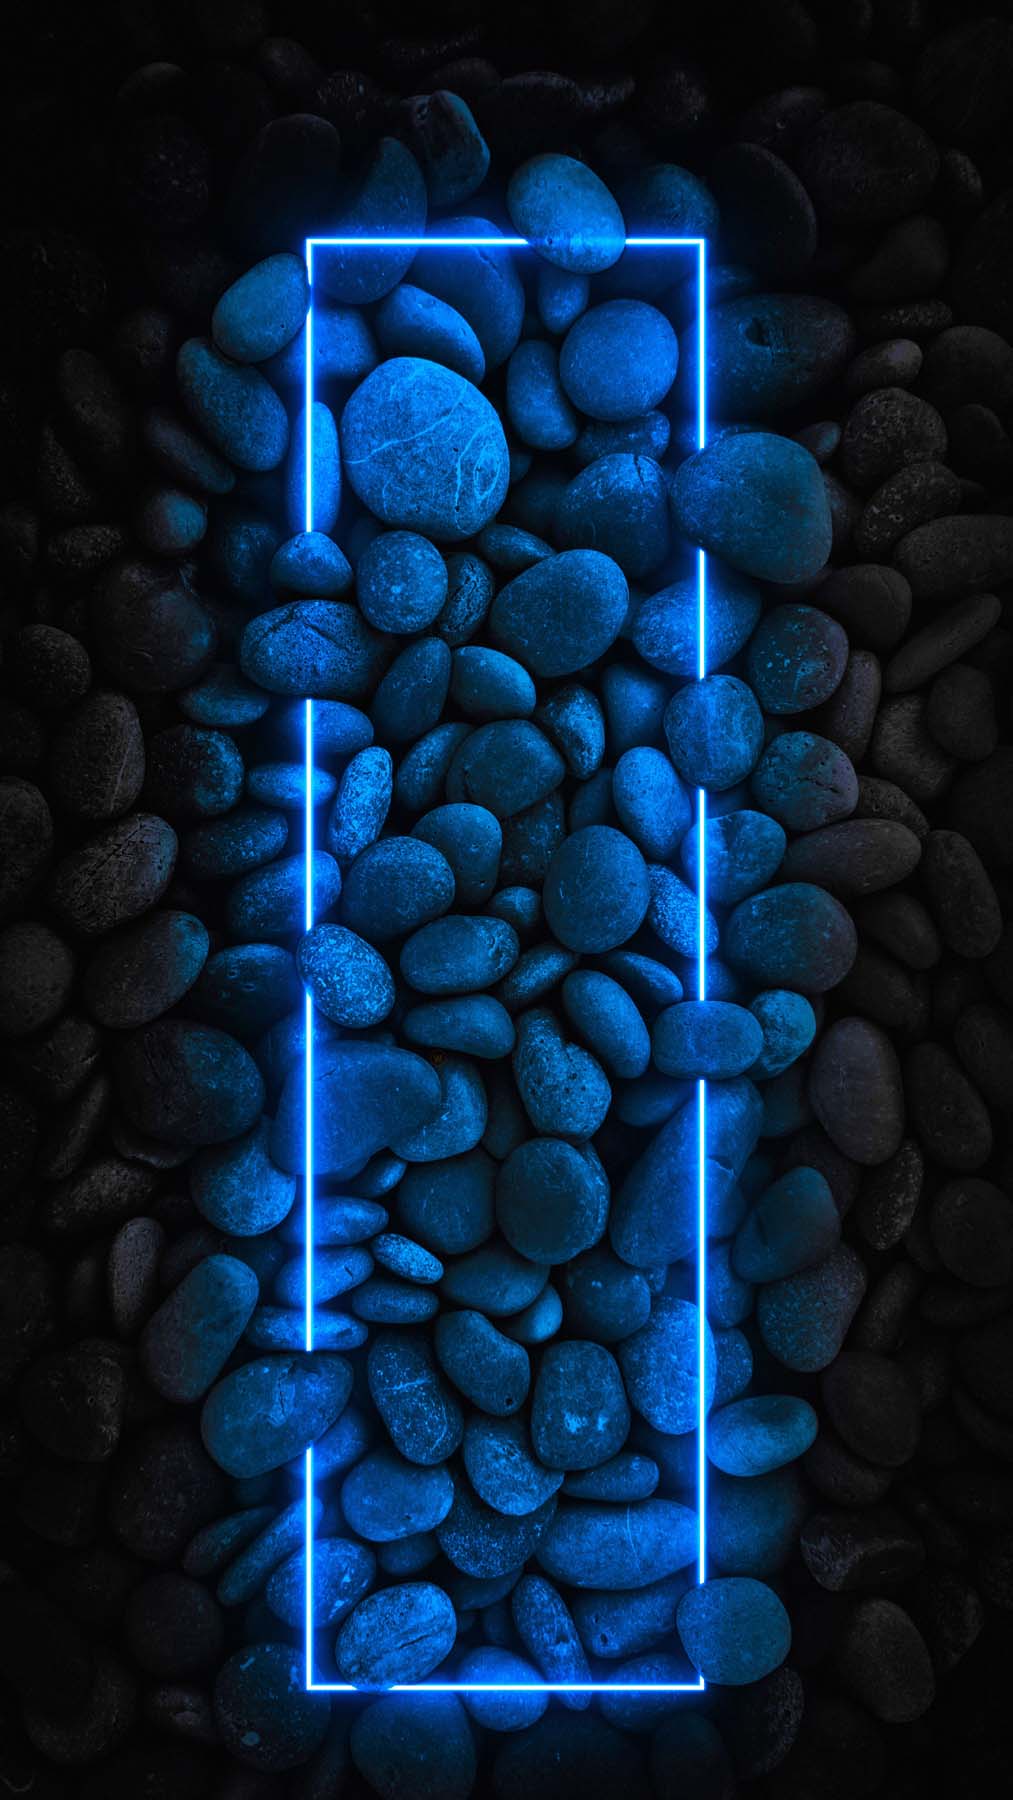 Neon Blue Iphone Wallpapers